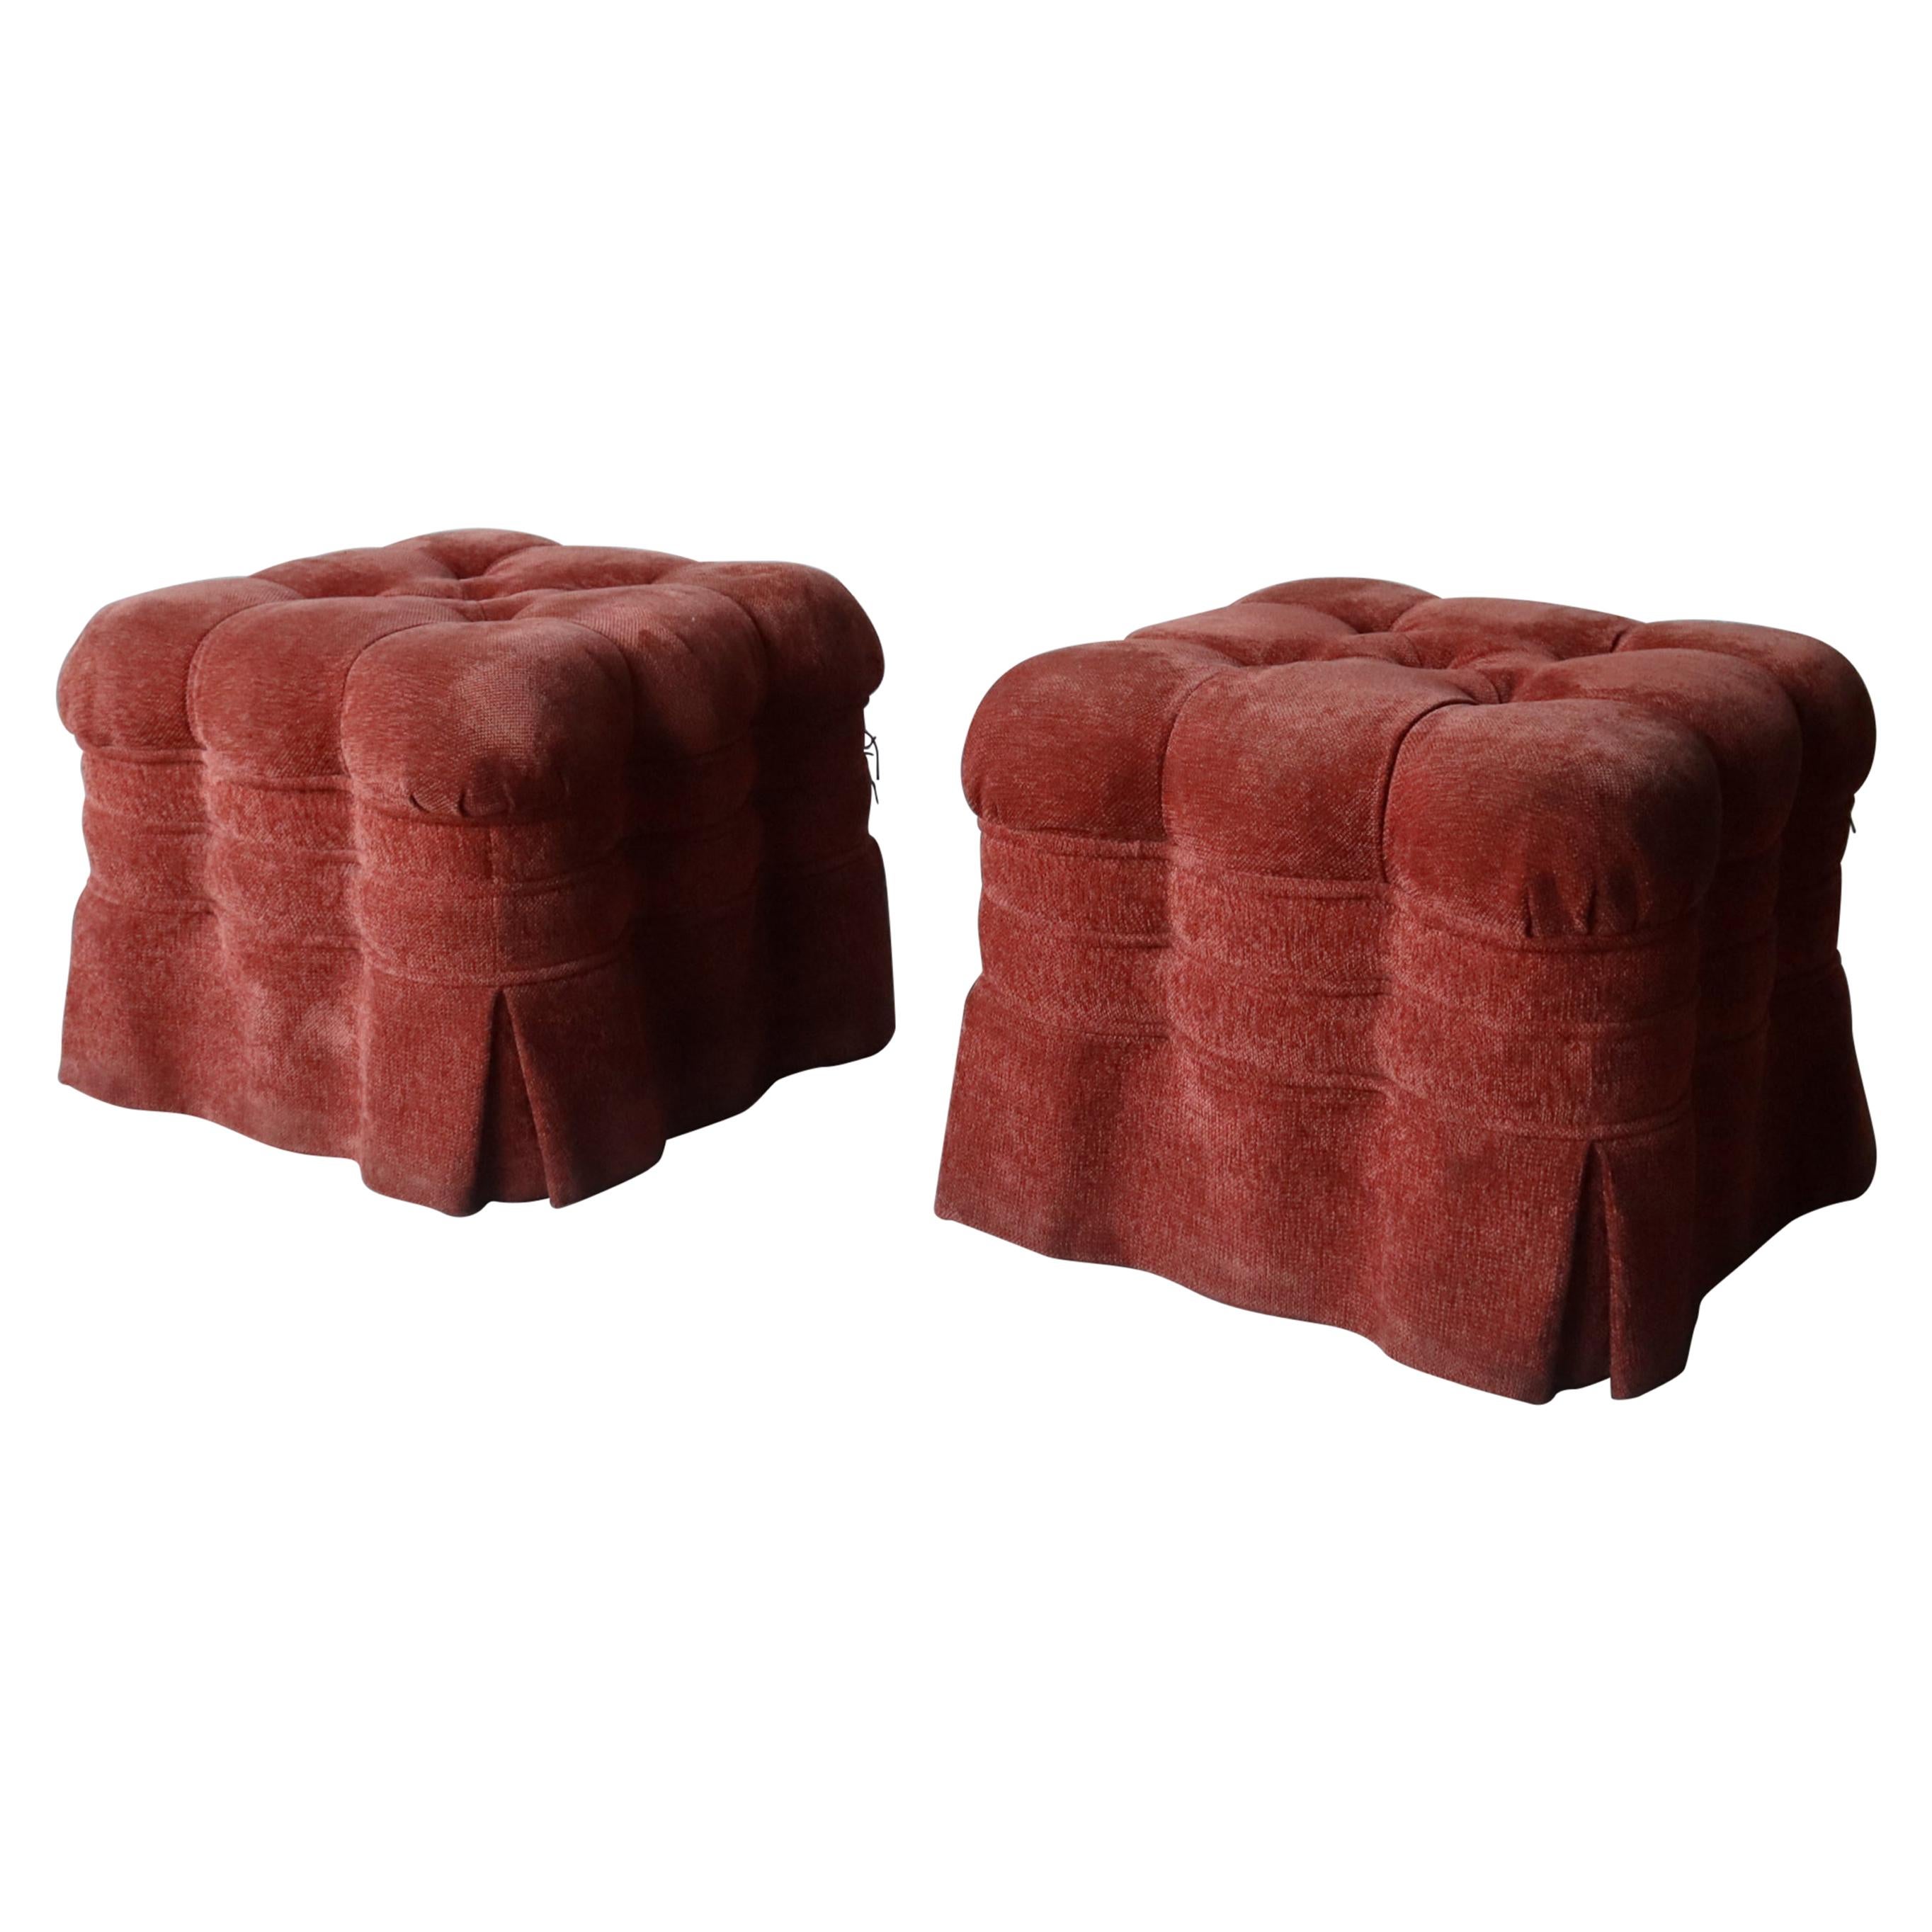 Large Pair of Skirted Biscuit Tufted Ottomans